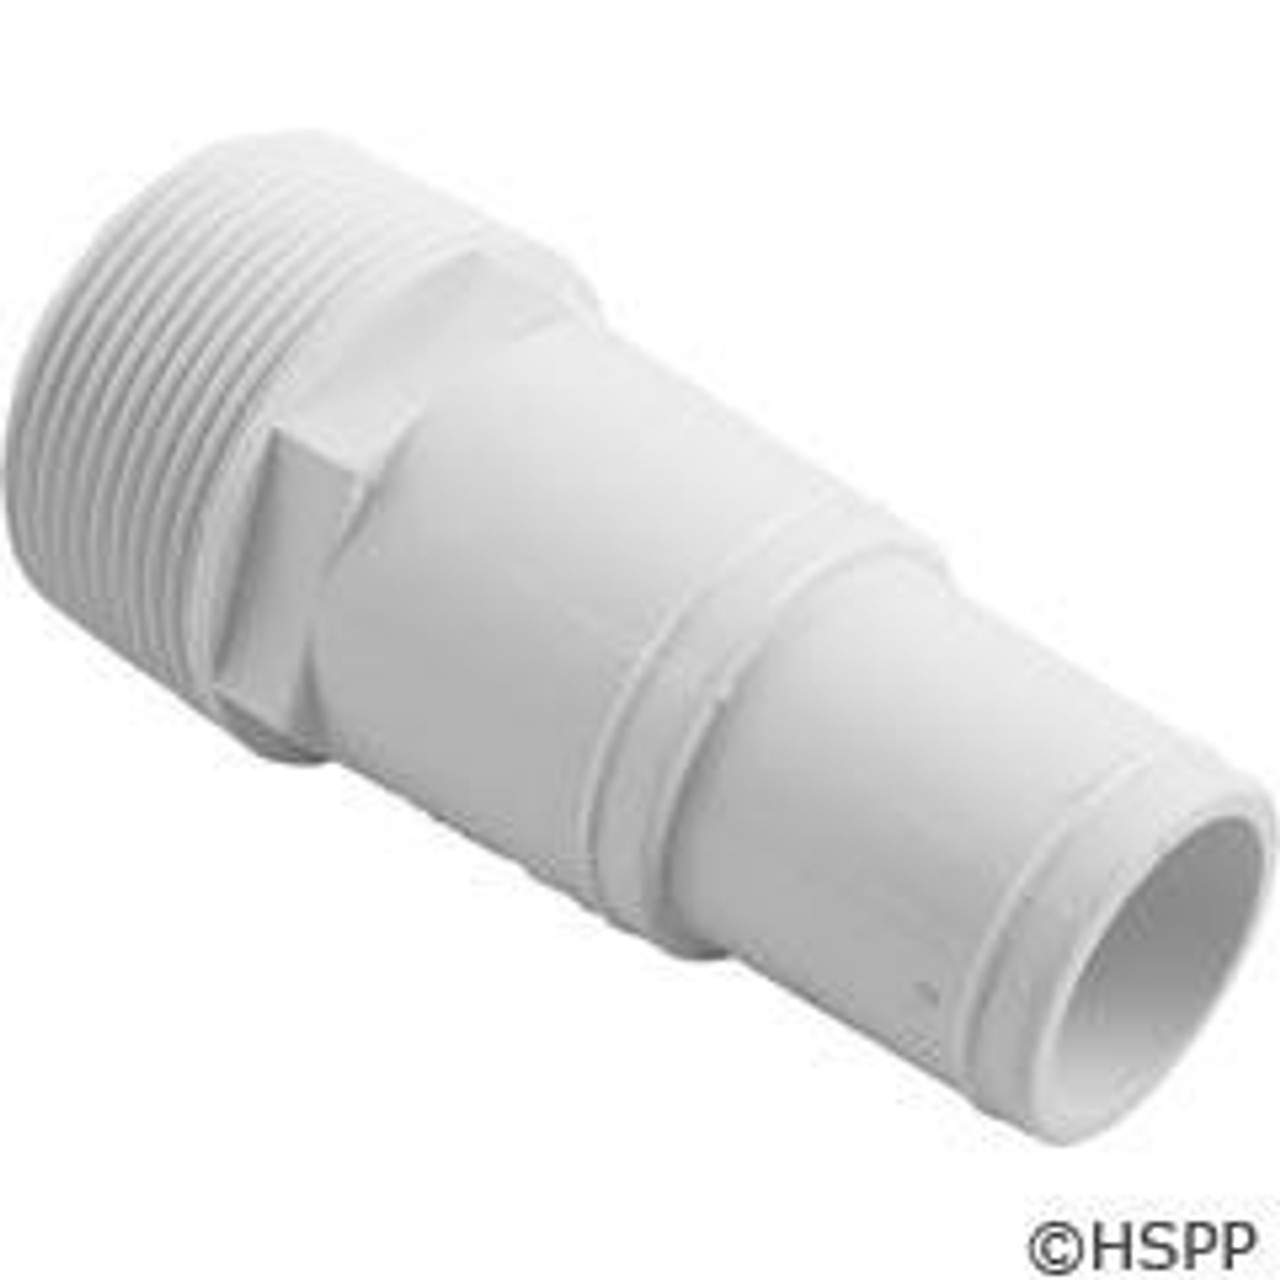 Barb Adapter, 1-1/2"mpt x 1-1/4"s or 1-1/2"s, Generic